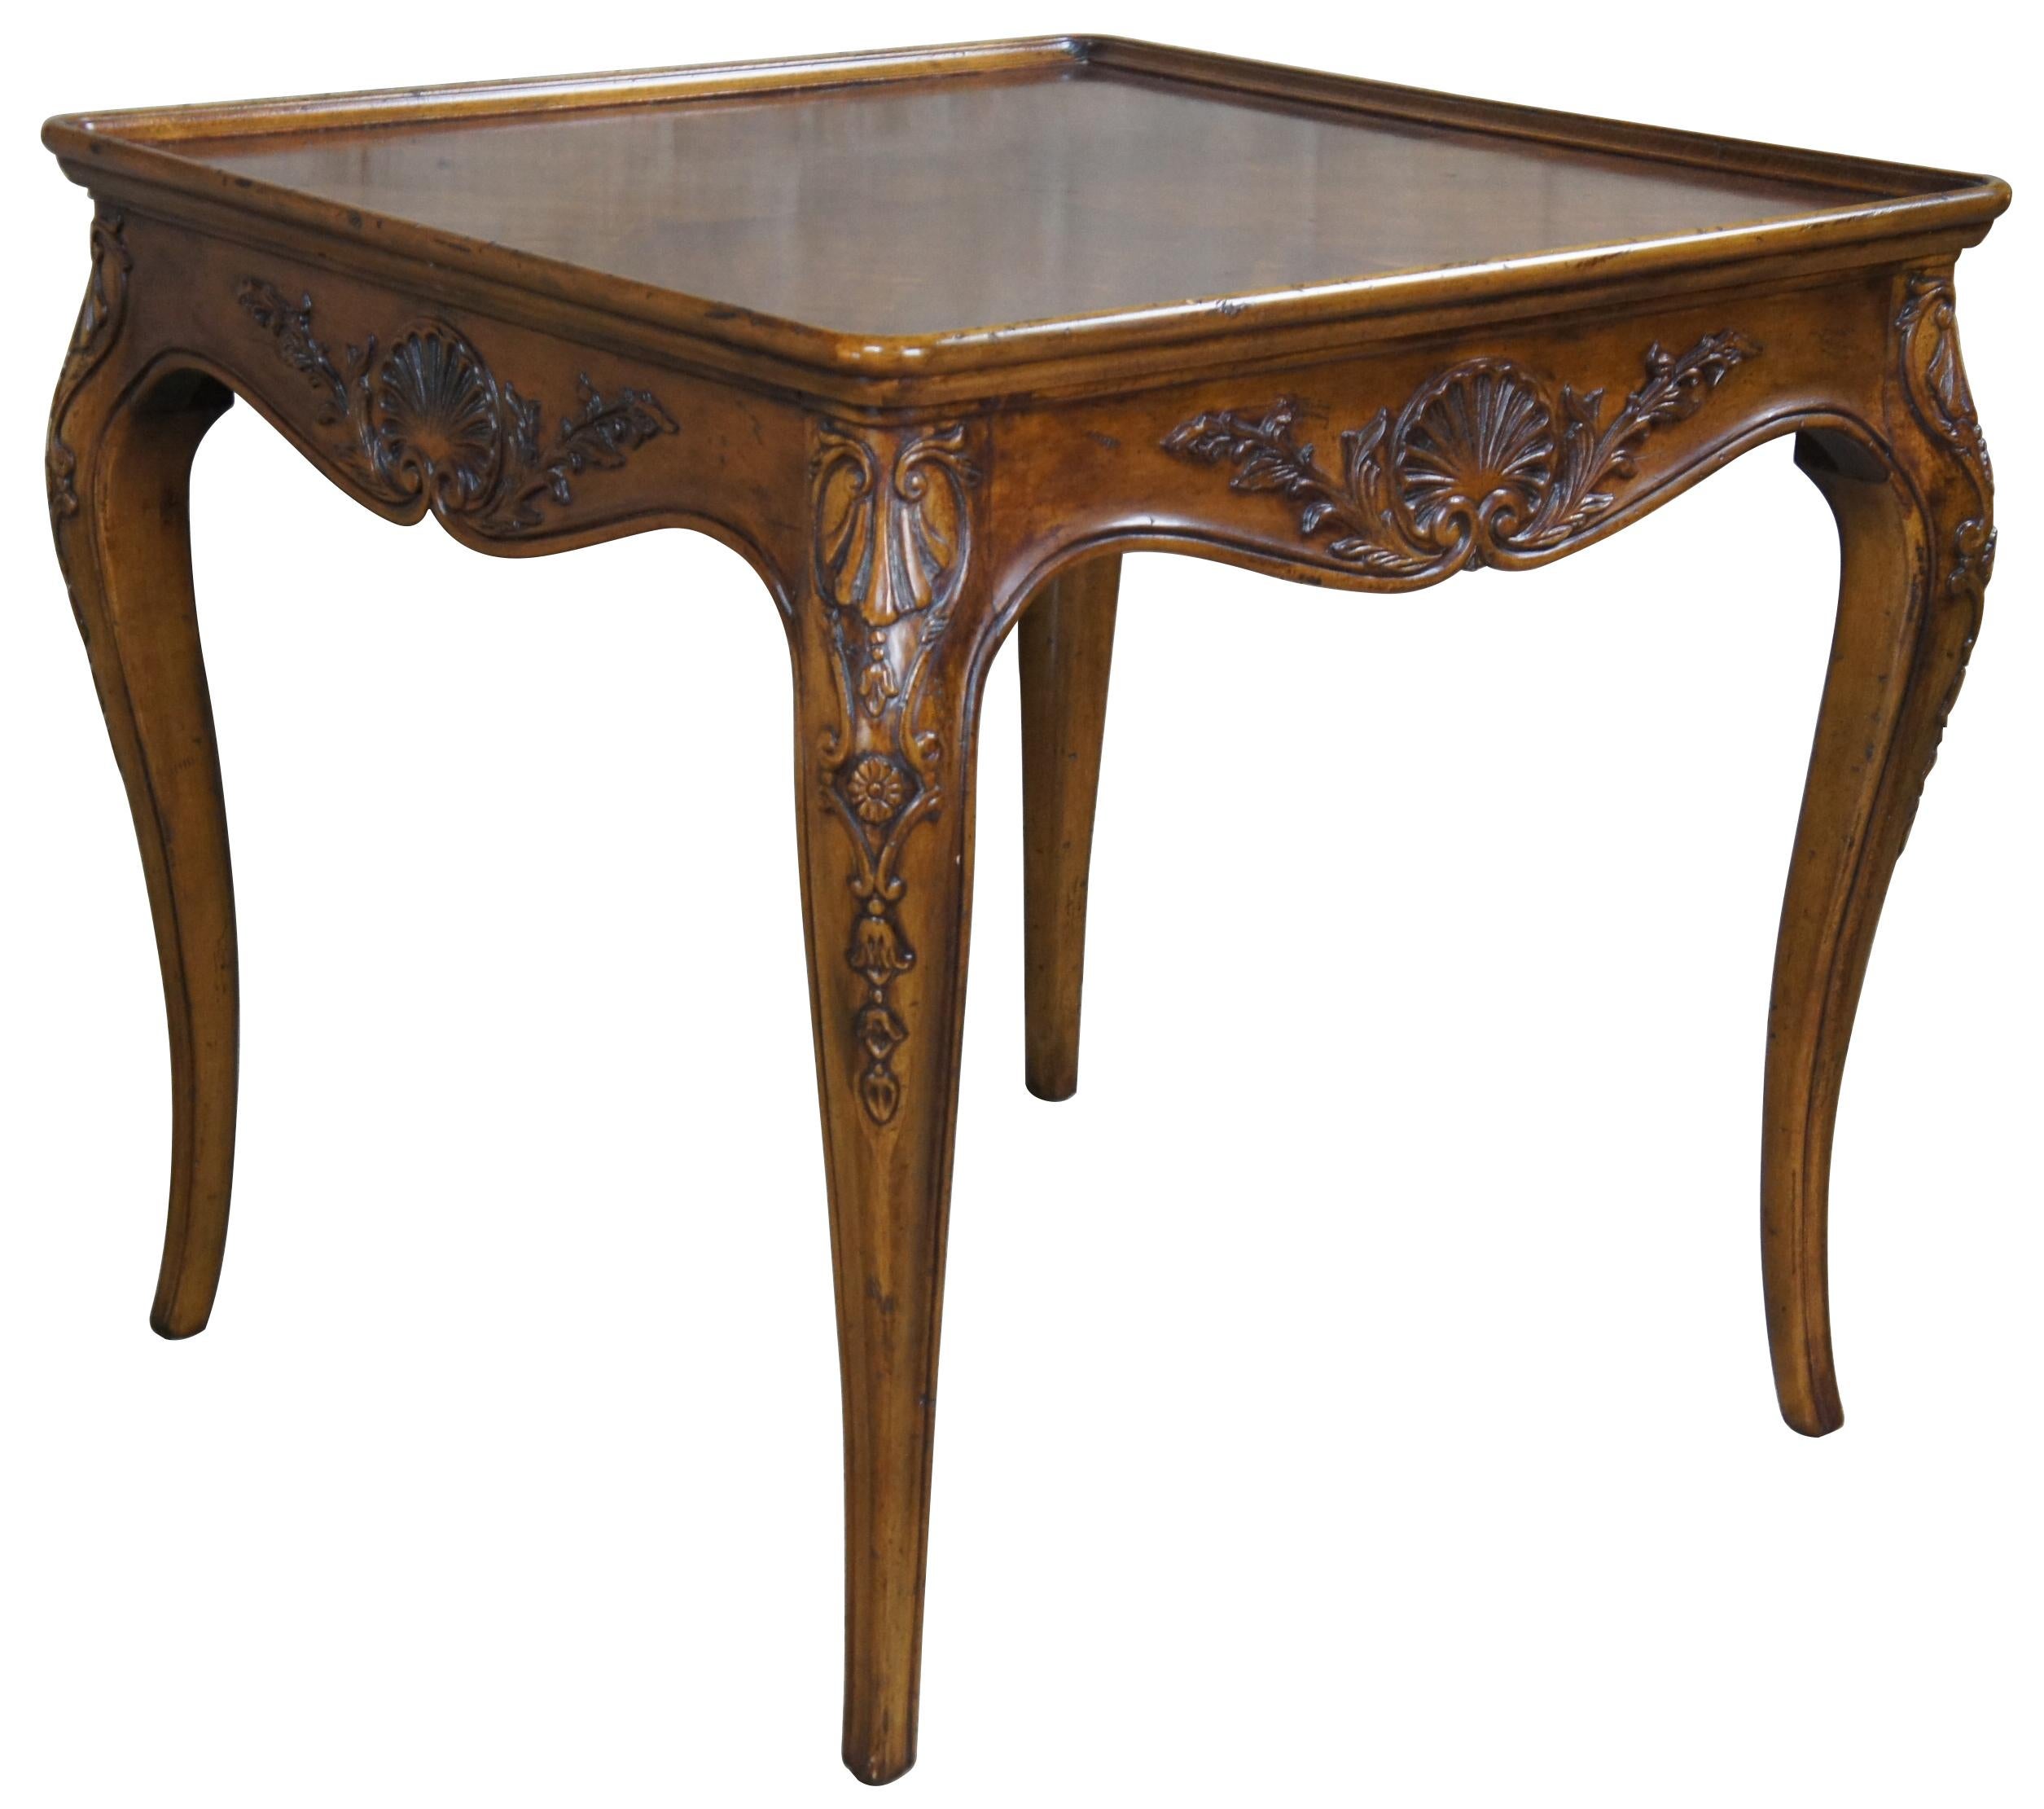 Henredon French Country side table, circa 1986. Made from walnut with an inset bookmatched walnut top over a carved and scalloped arpon. The tables are supported by cabriole legs with shell and cartouche carvings. Style No 3201-42.
 